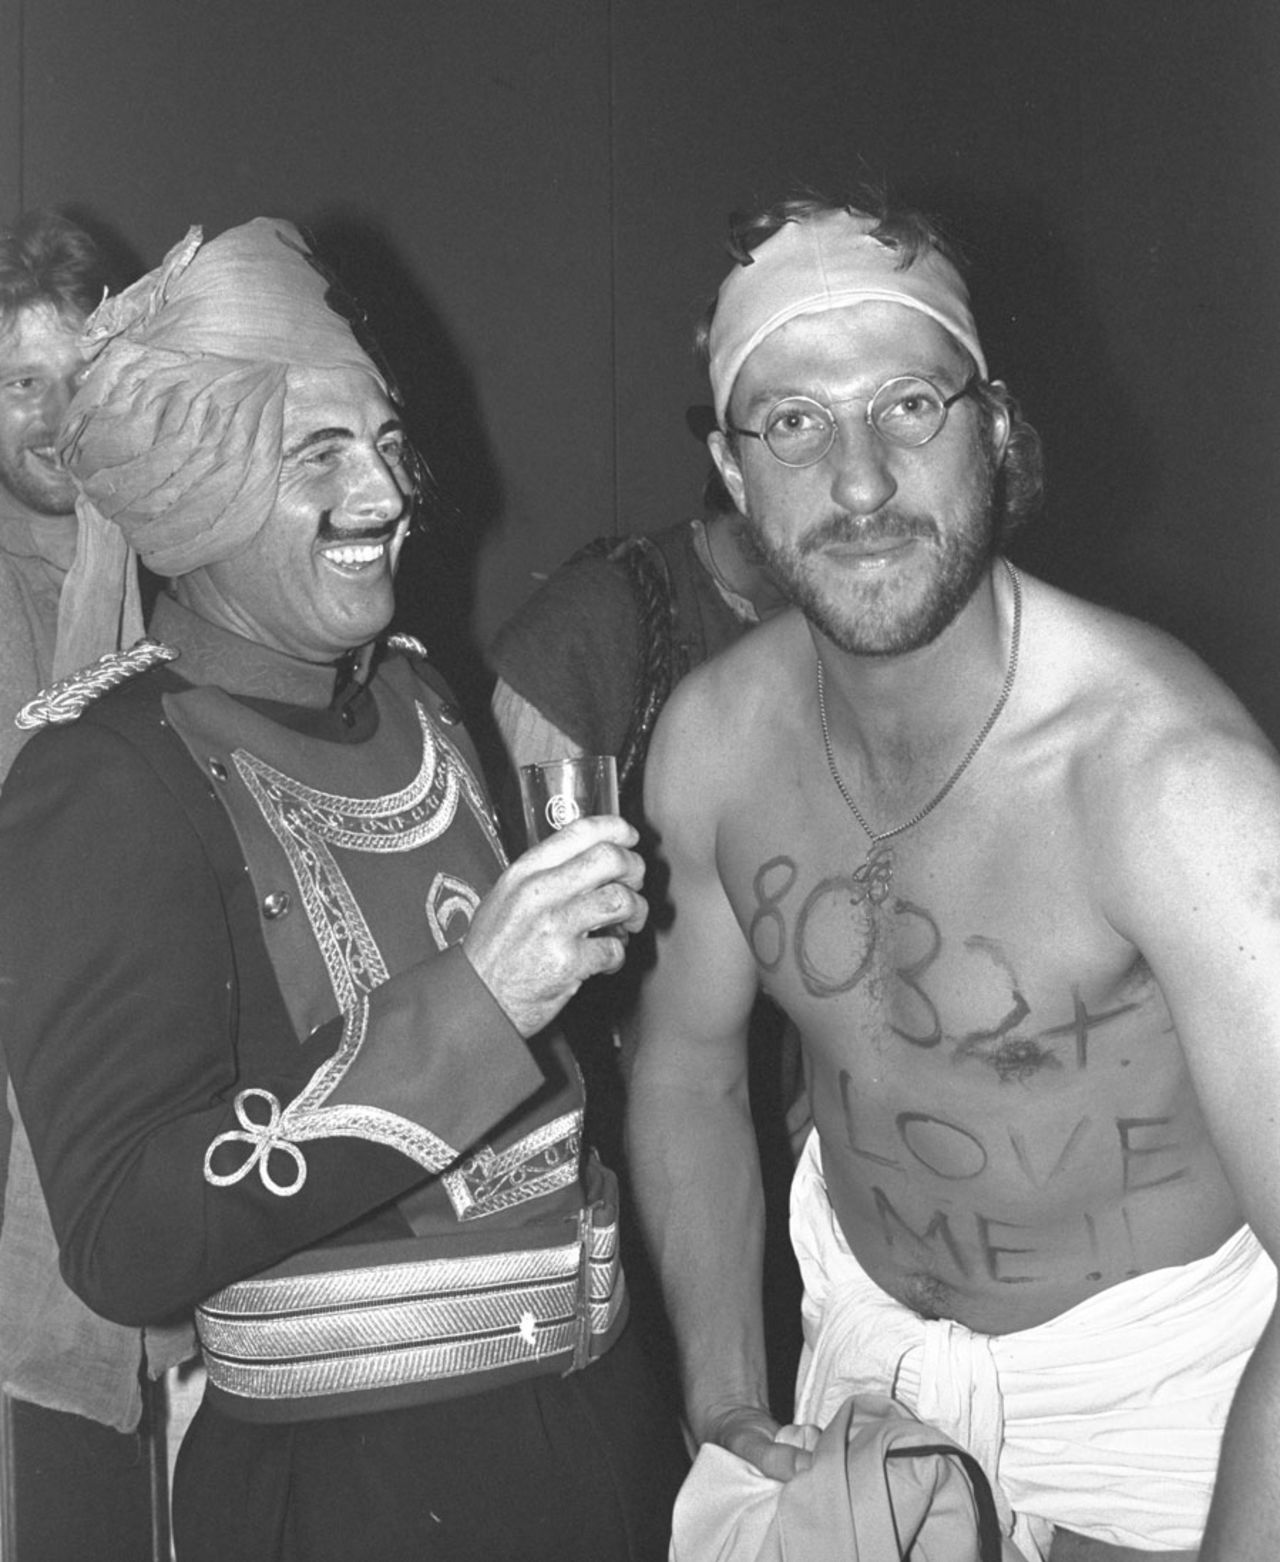 Ian Botham ribs Geoff Boycott at a party after Boycott became the highest run-getter in Tests, Delhi, 1981